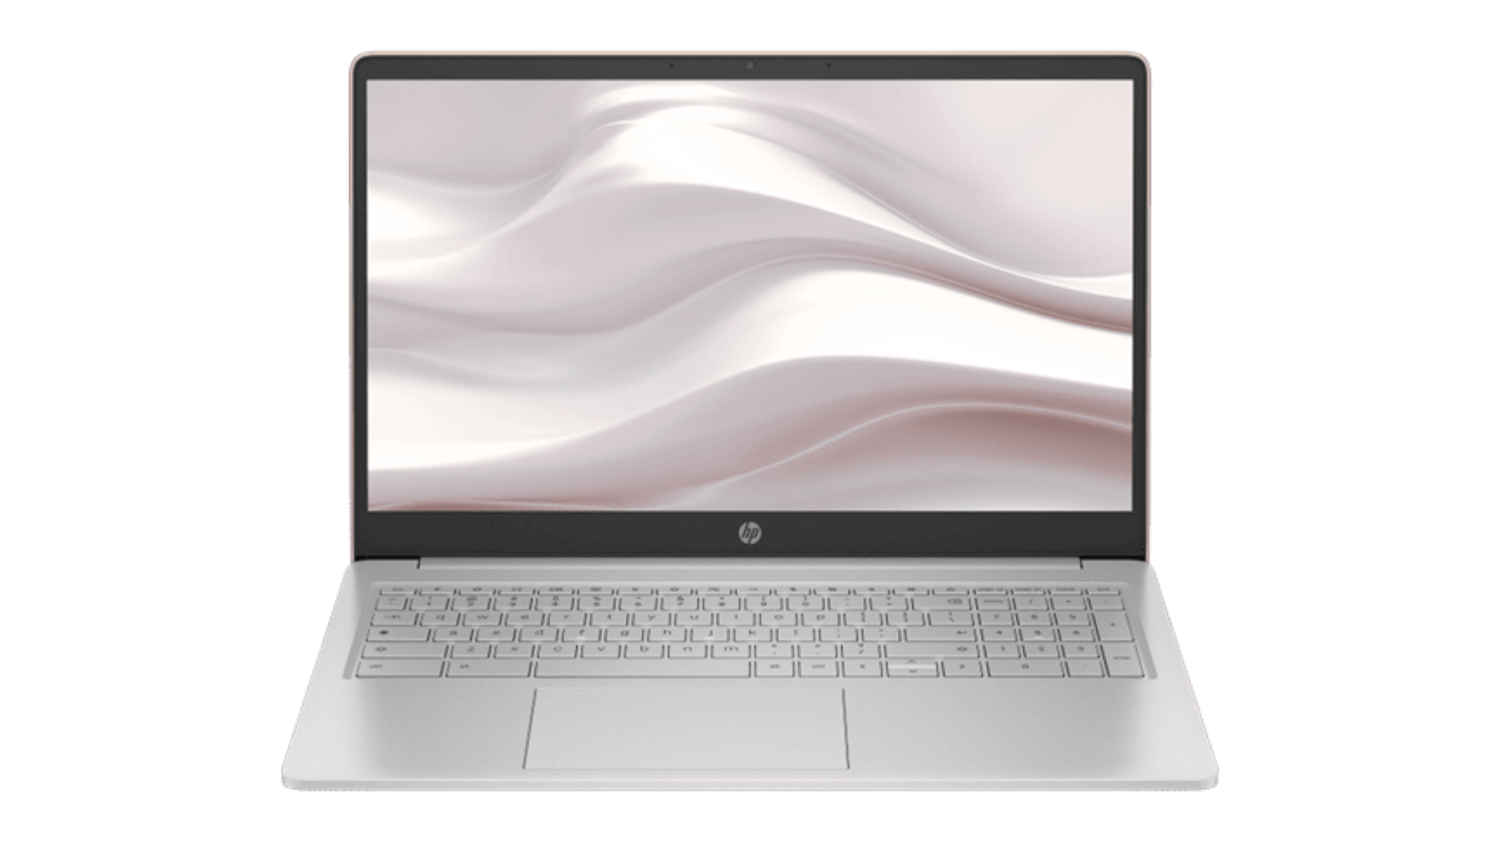 HP introduces new Chromebook laptops in India to enable smart learning for GenZ